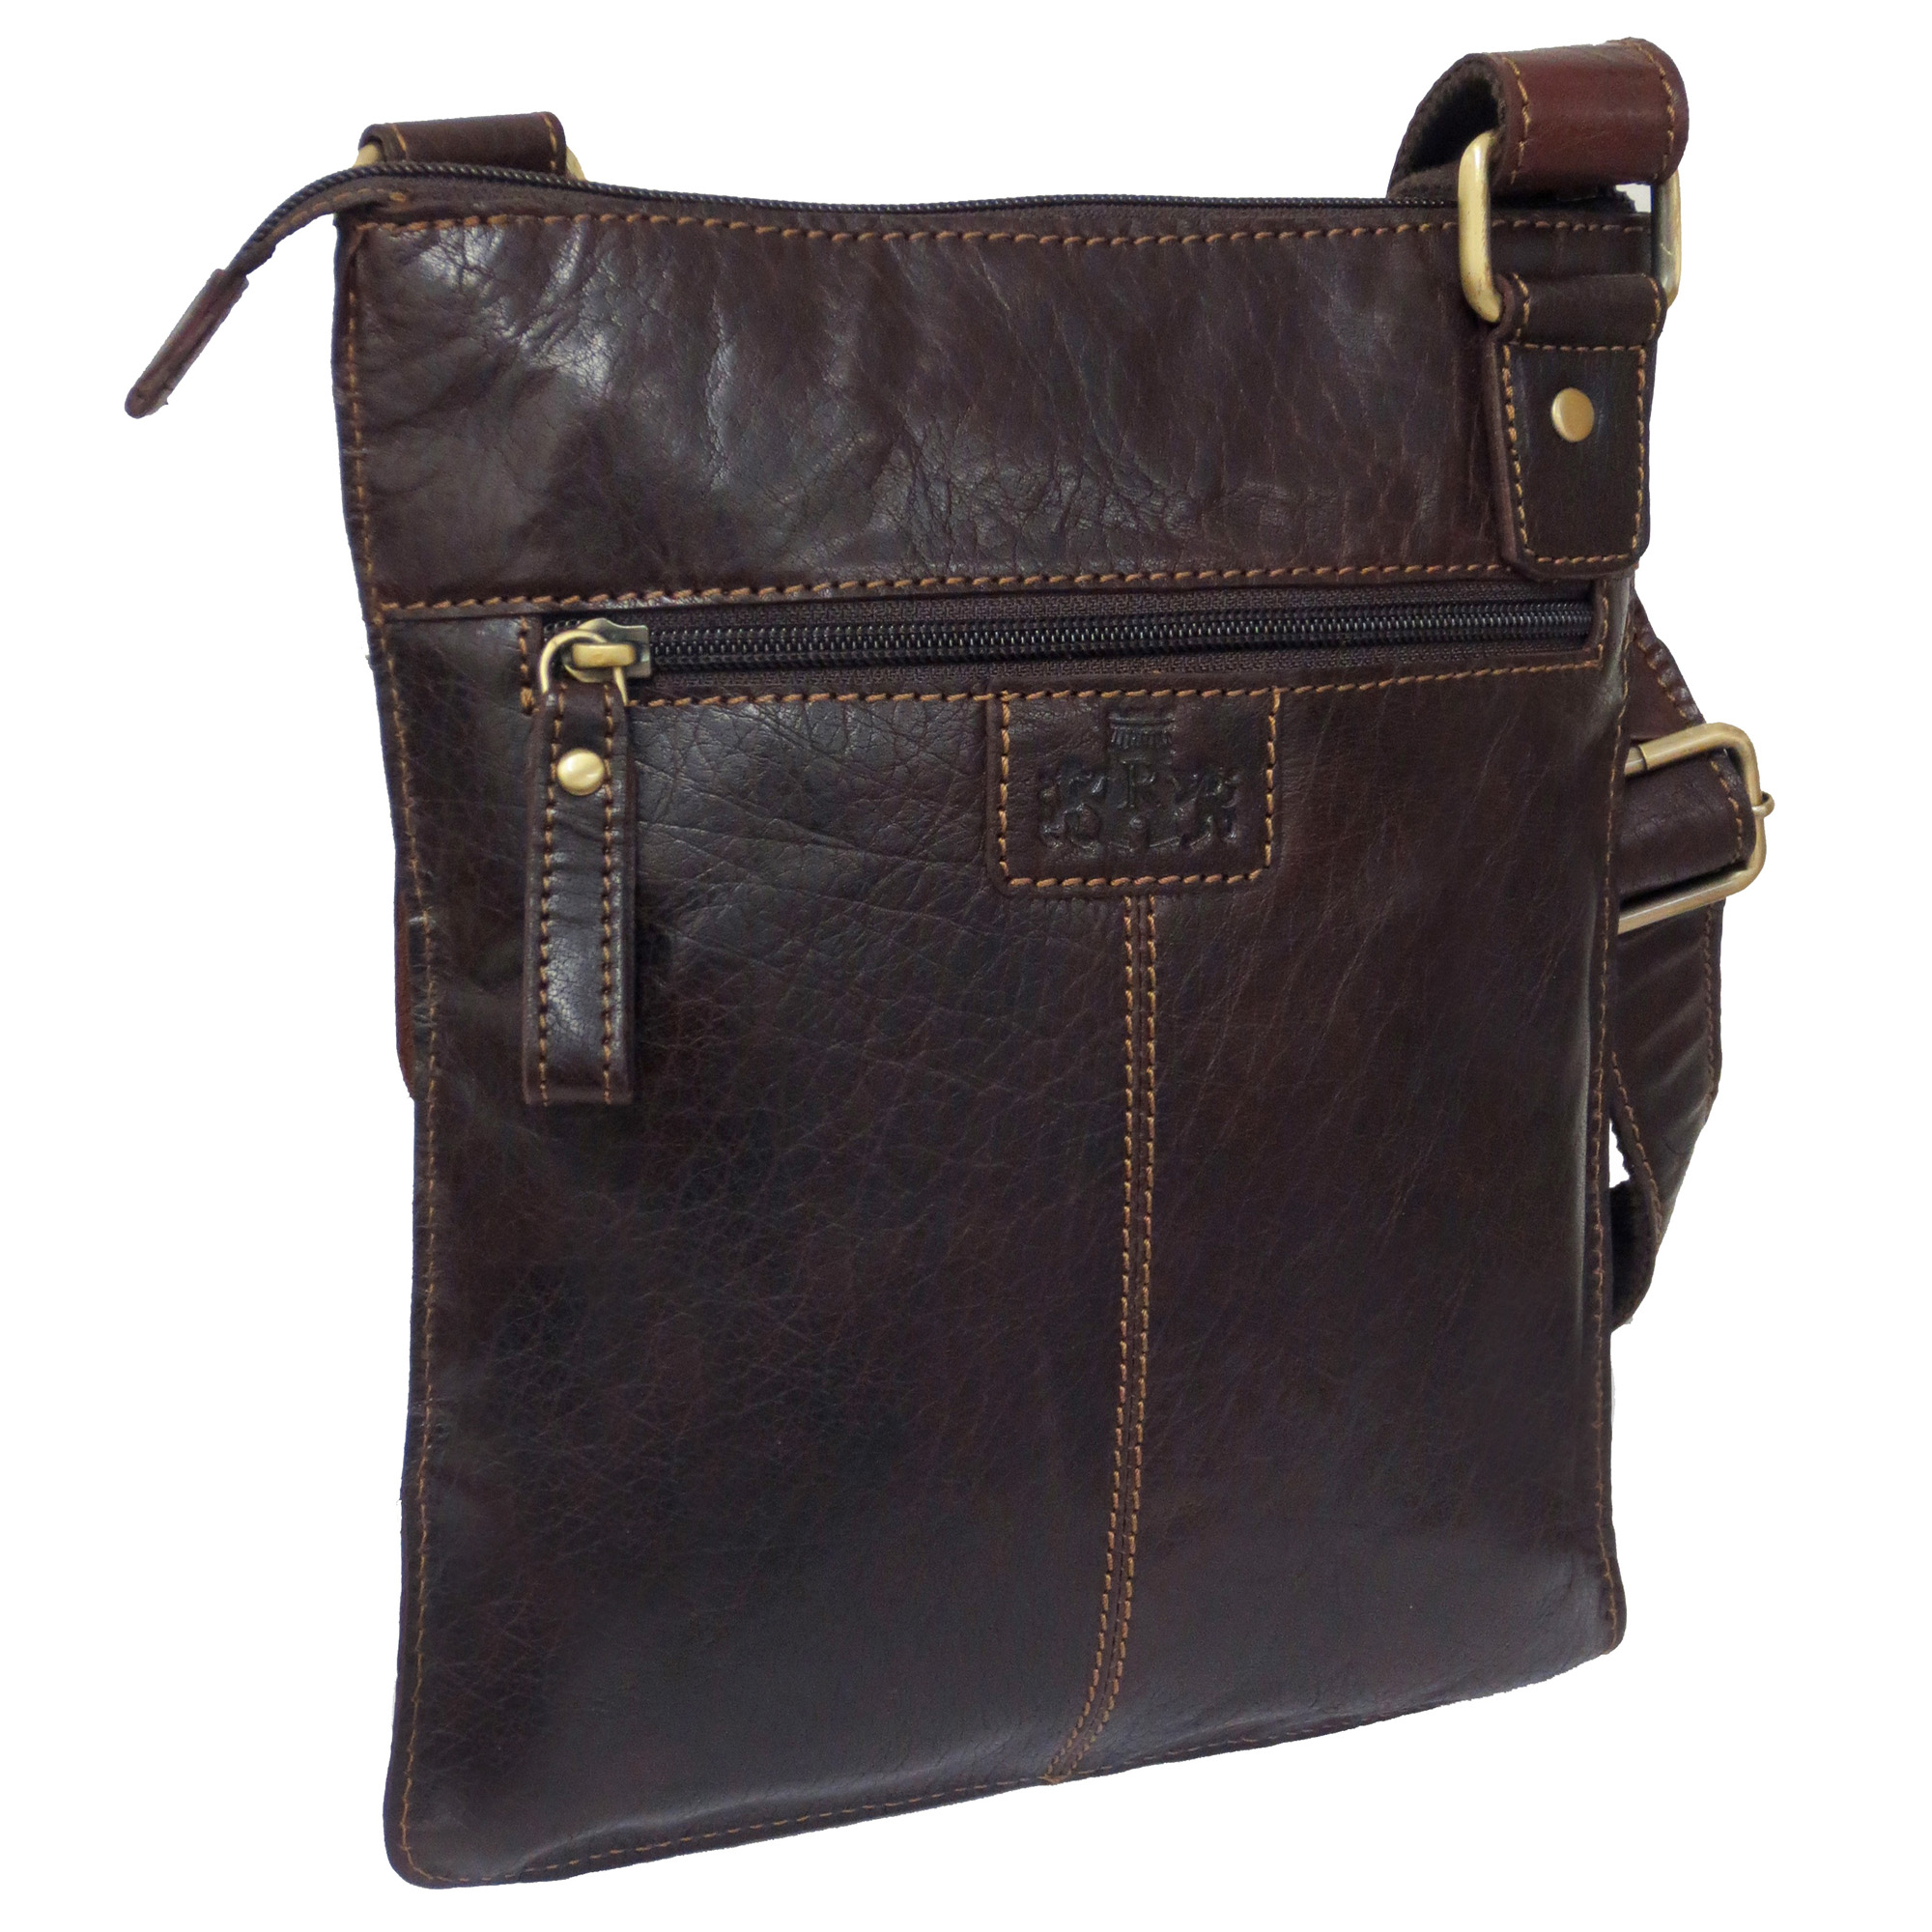 The Handbag Company have a range of women’s leather bags by Rowallan of ...